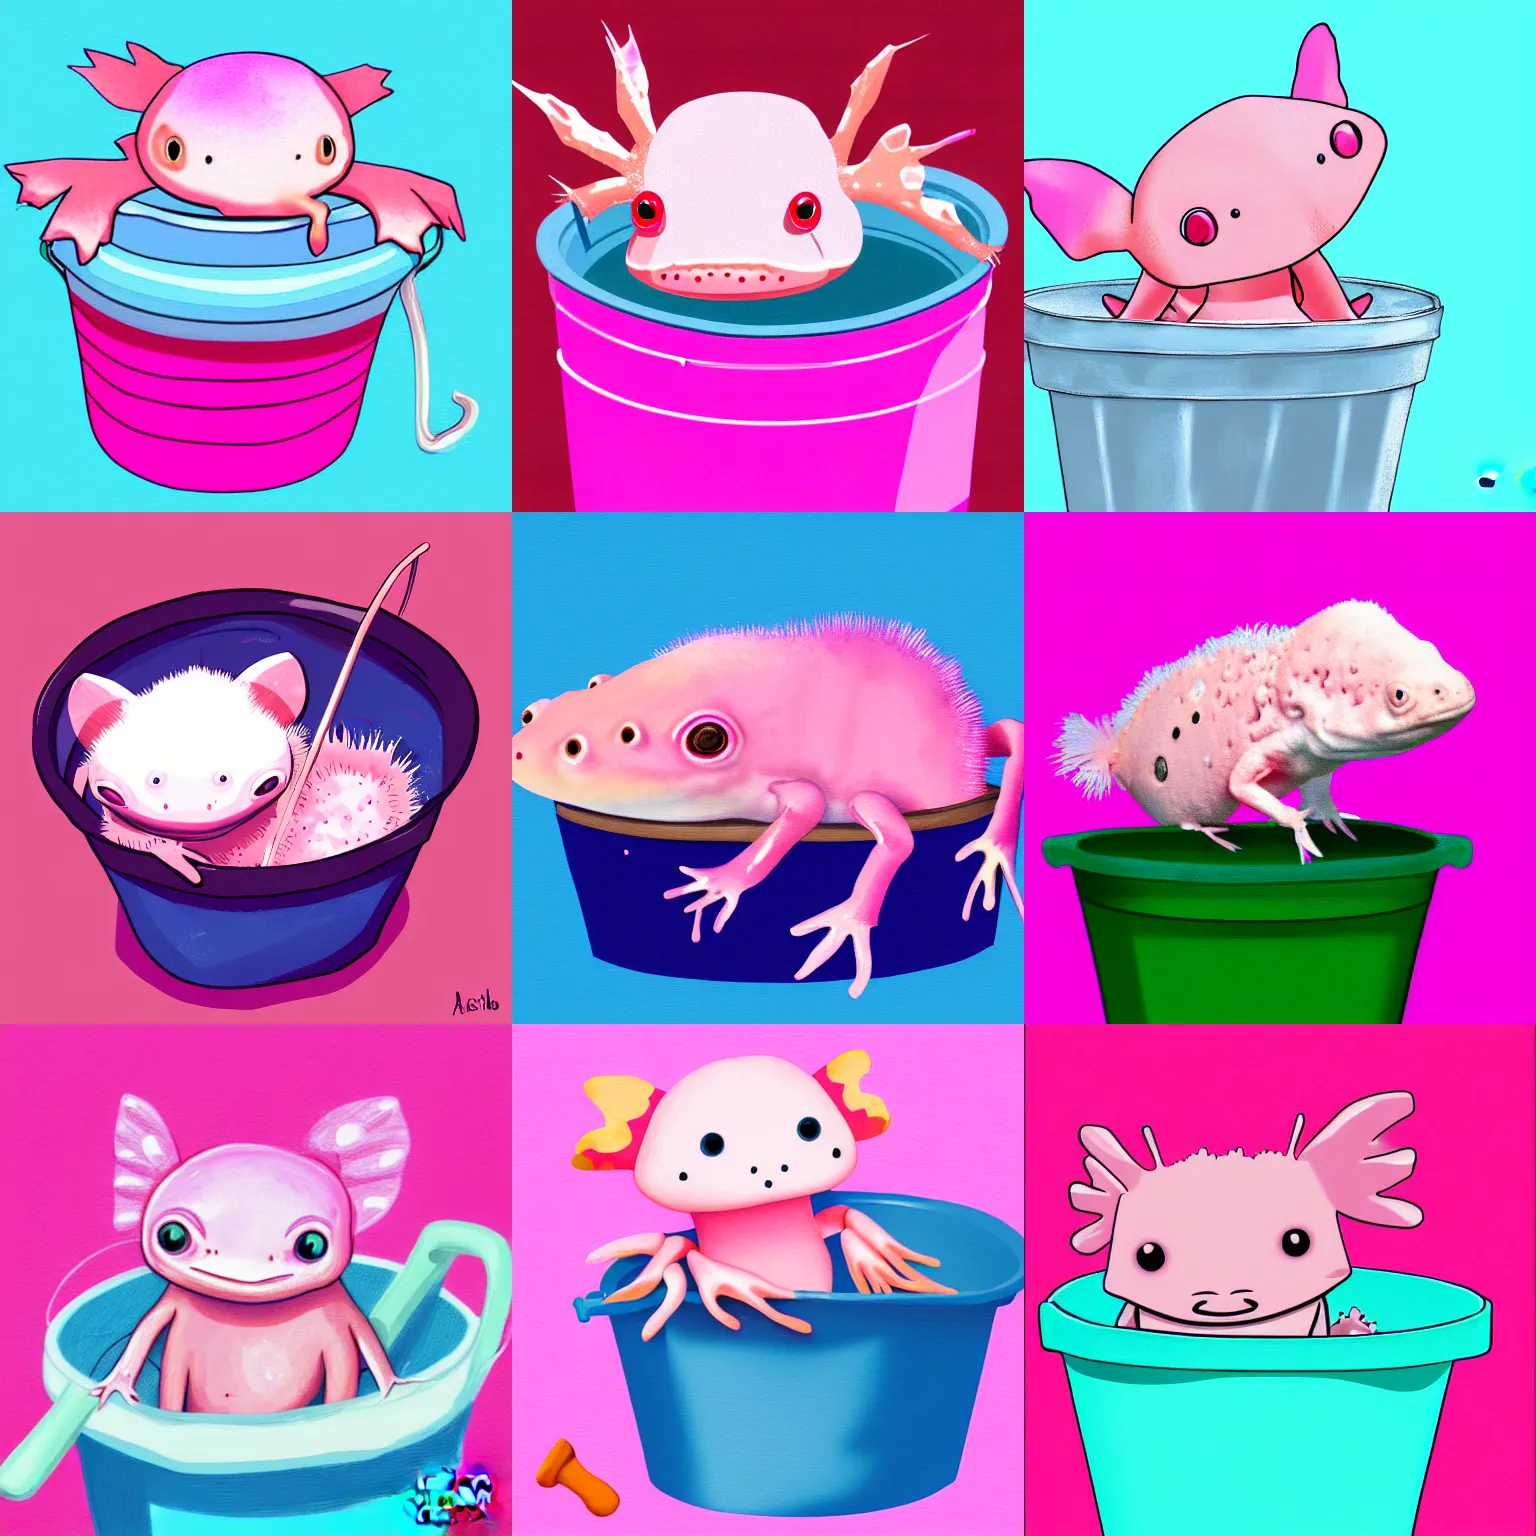 Prompt: digital painting of a cute pink axolotl sitting in a bucket